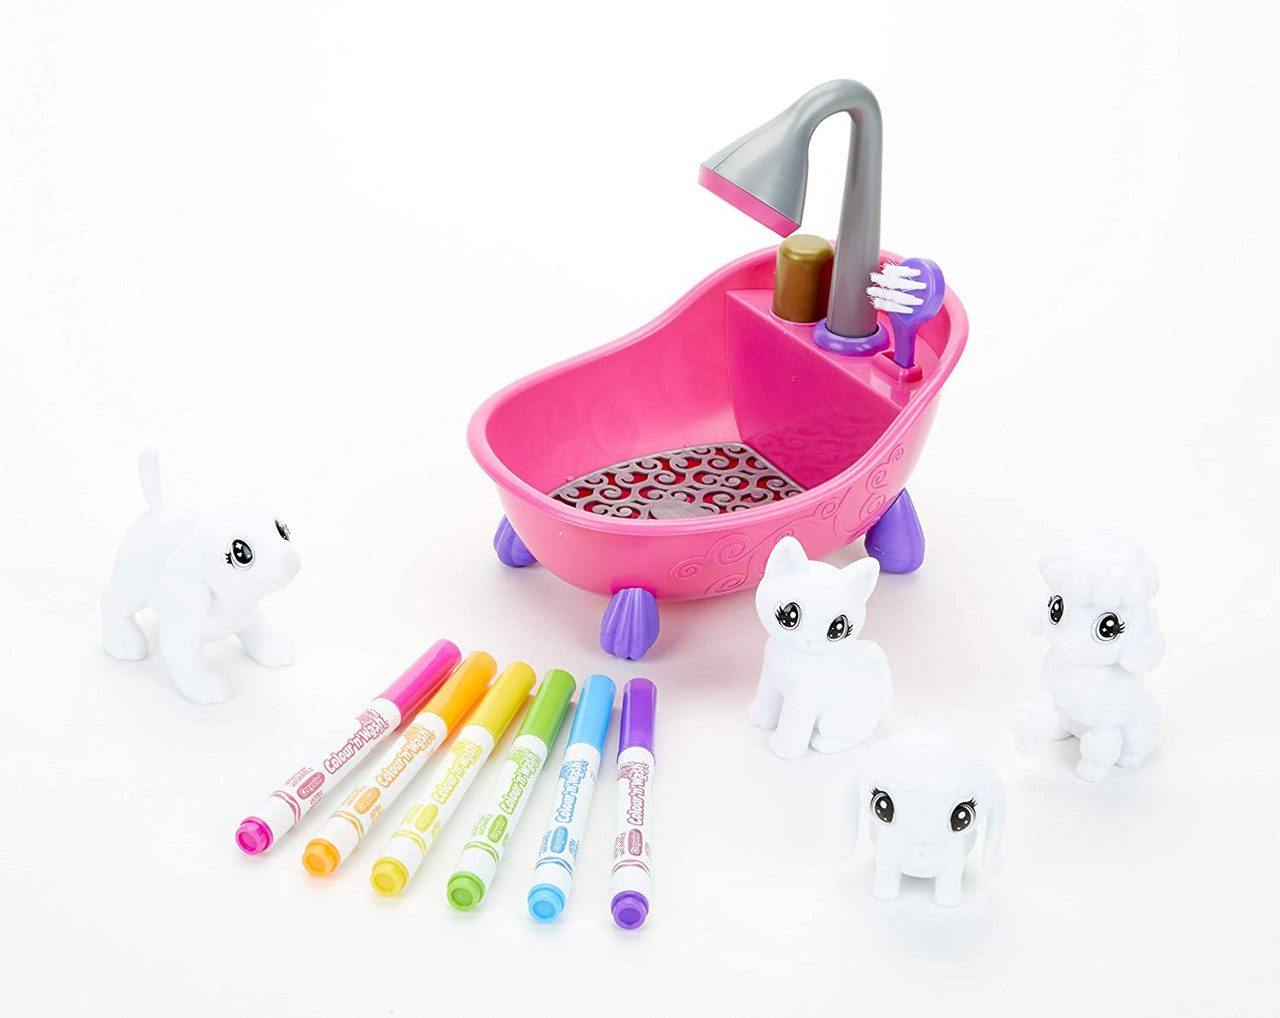 Scribble Scrubbie Pets, Tub Playset by Crayola